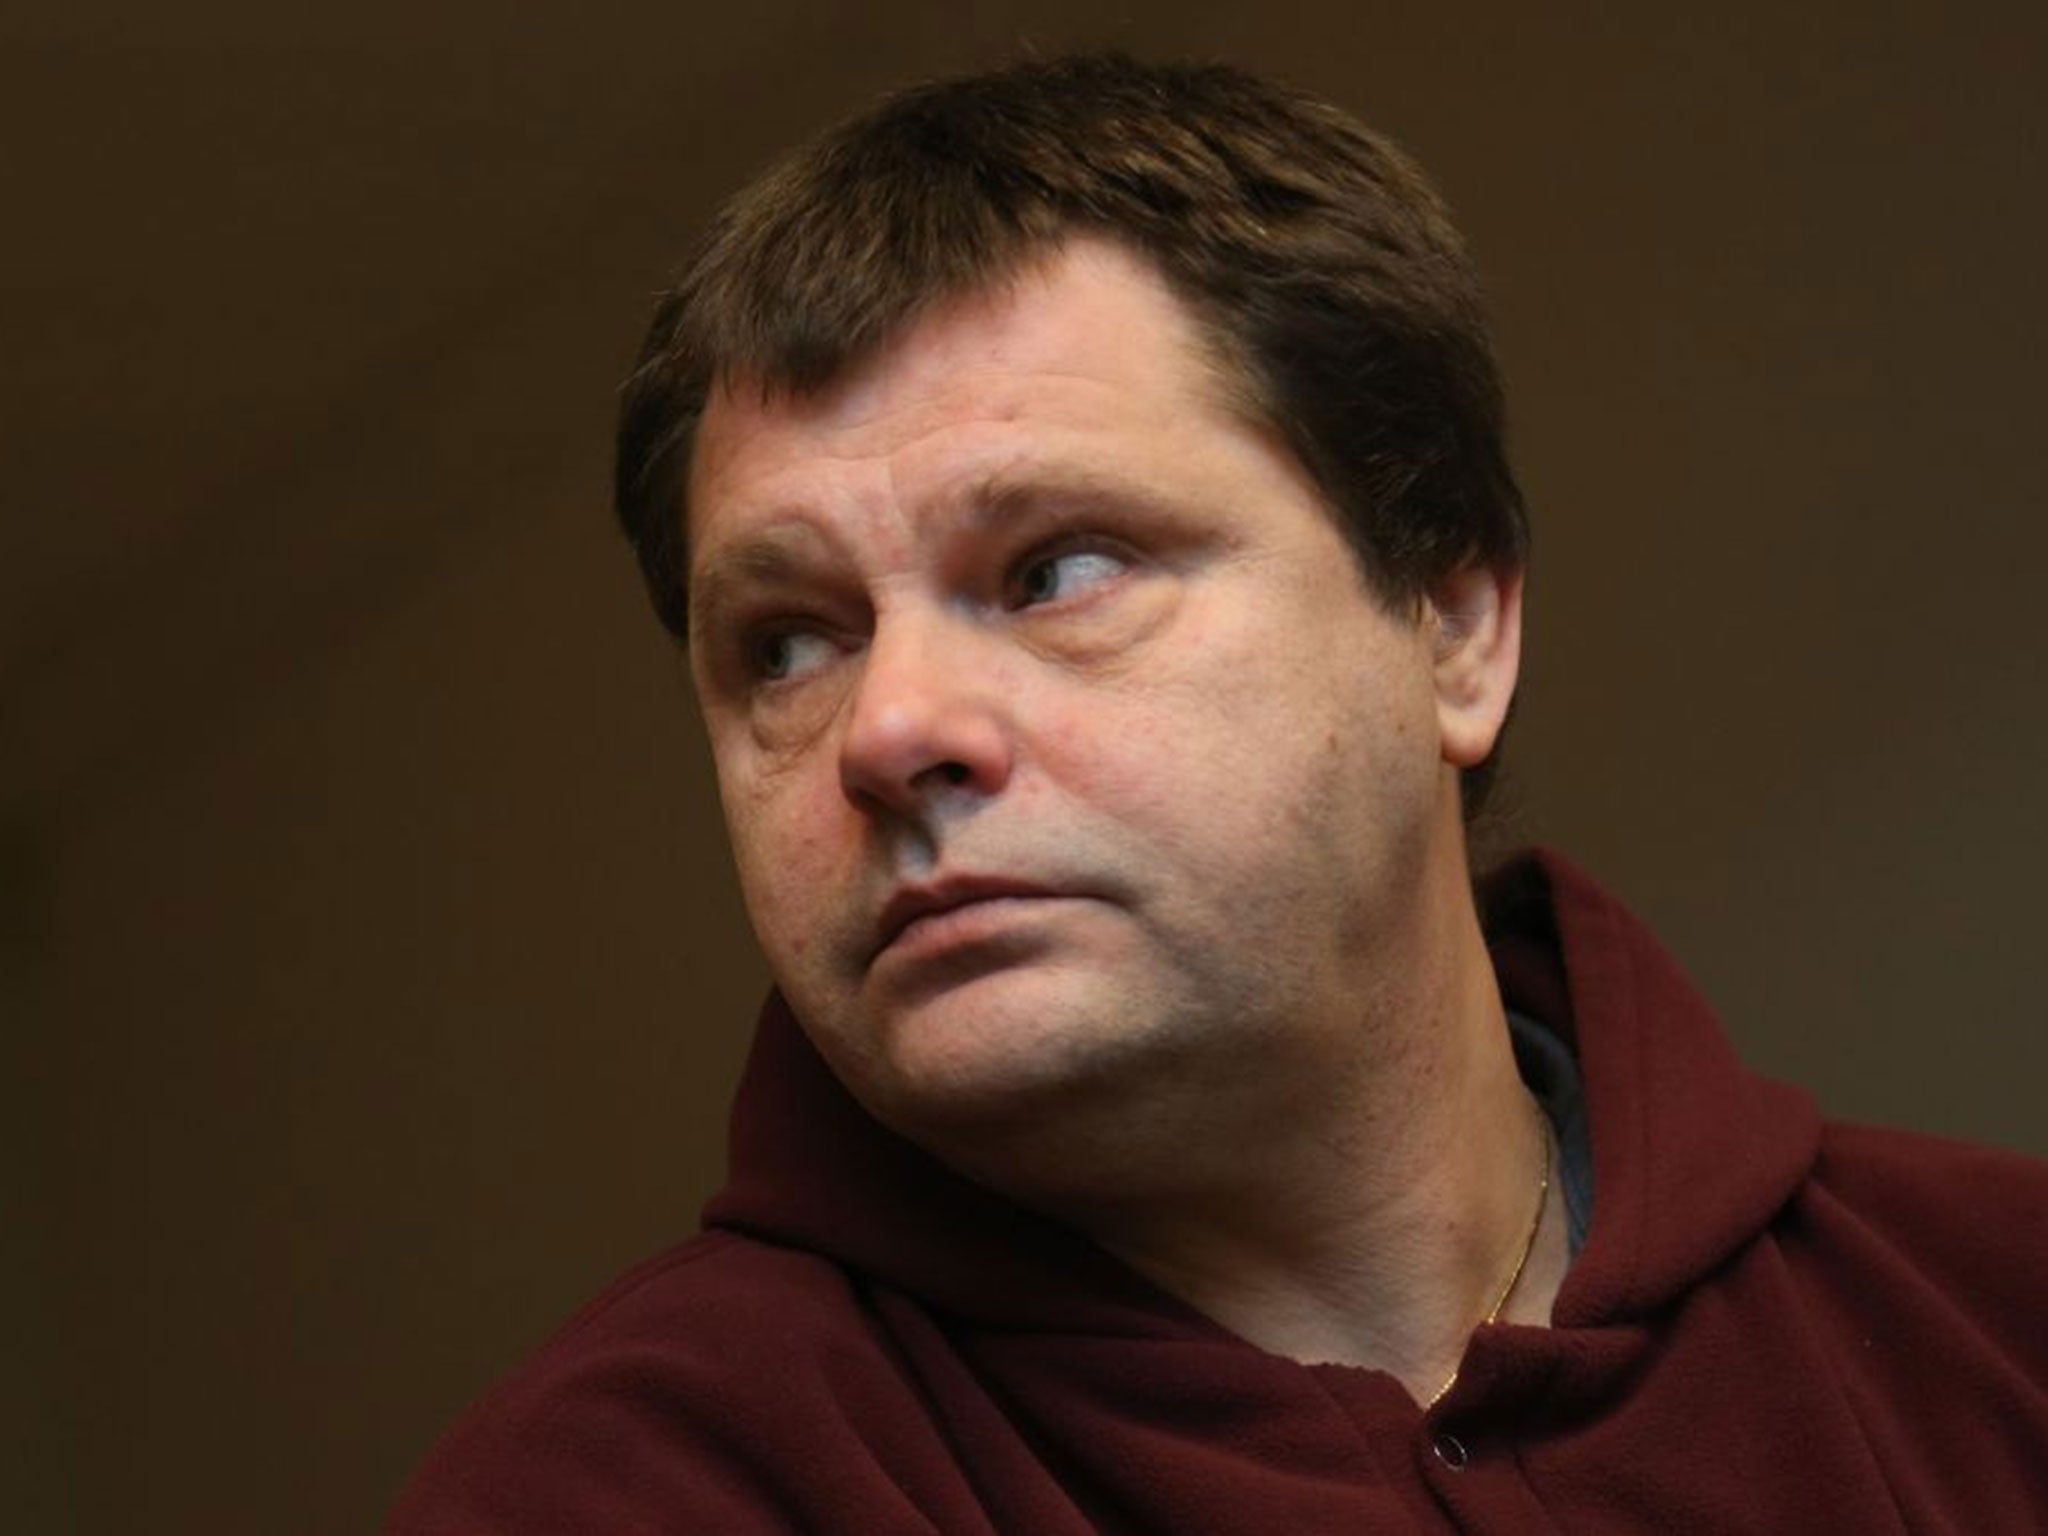 Belgium's Frank Van Den Bleeken attending a hearing to determine if he will be allowed to be euthanised, at the Court of Brussels.